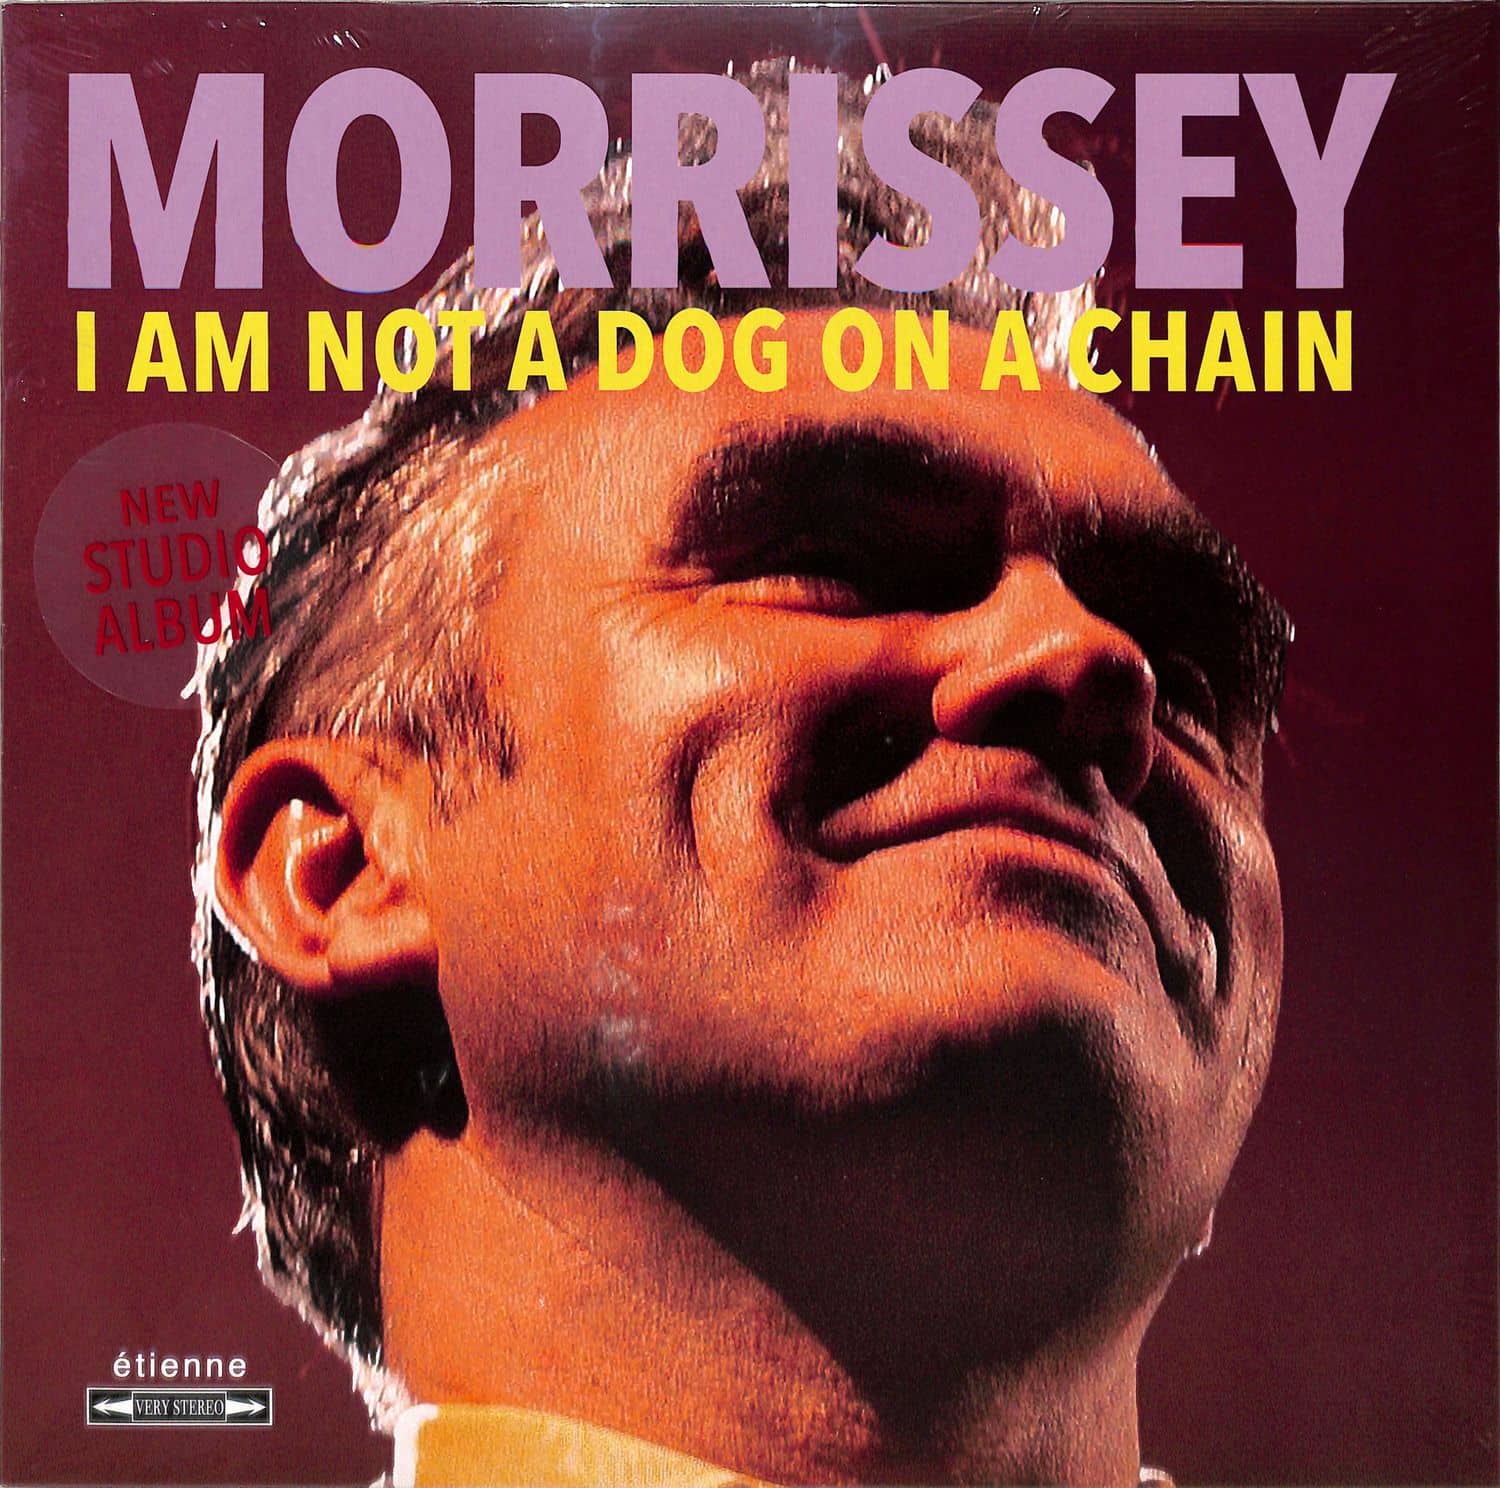 Morrissey - I AM NOT A DOG ON A CHAIN 